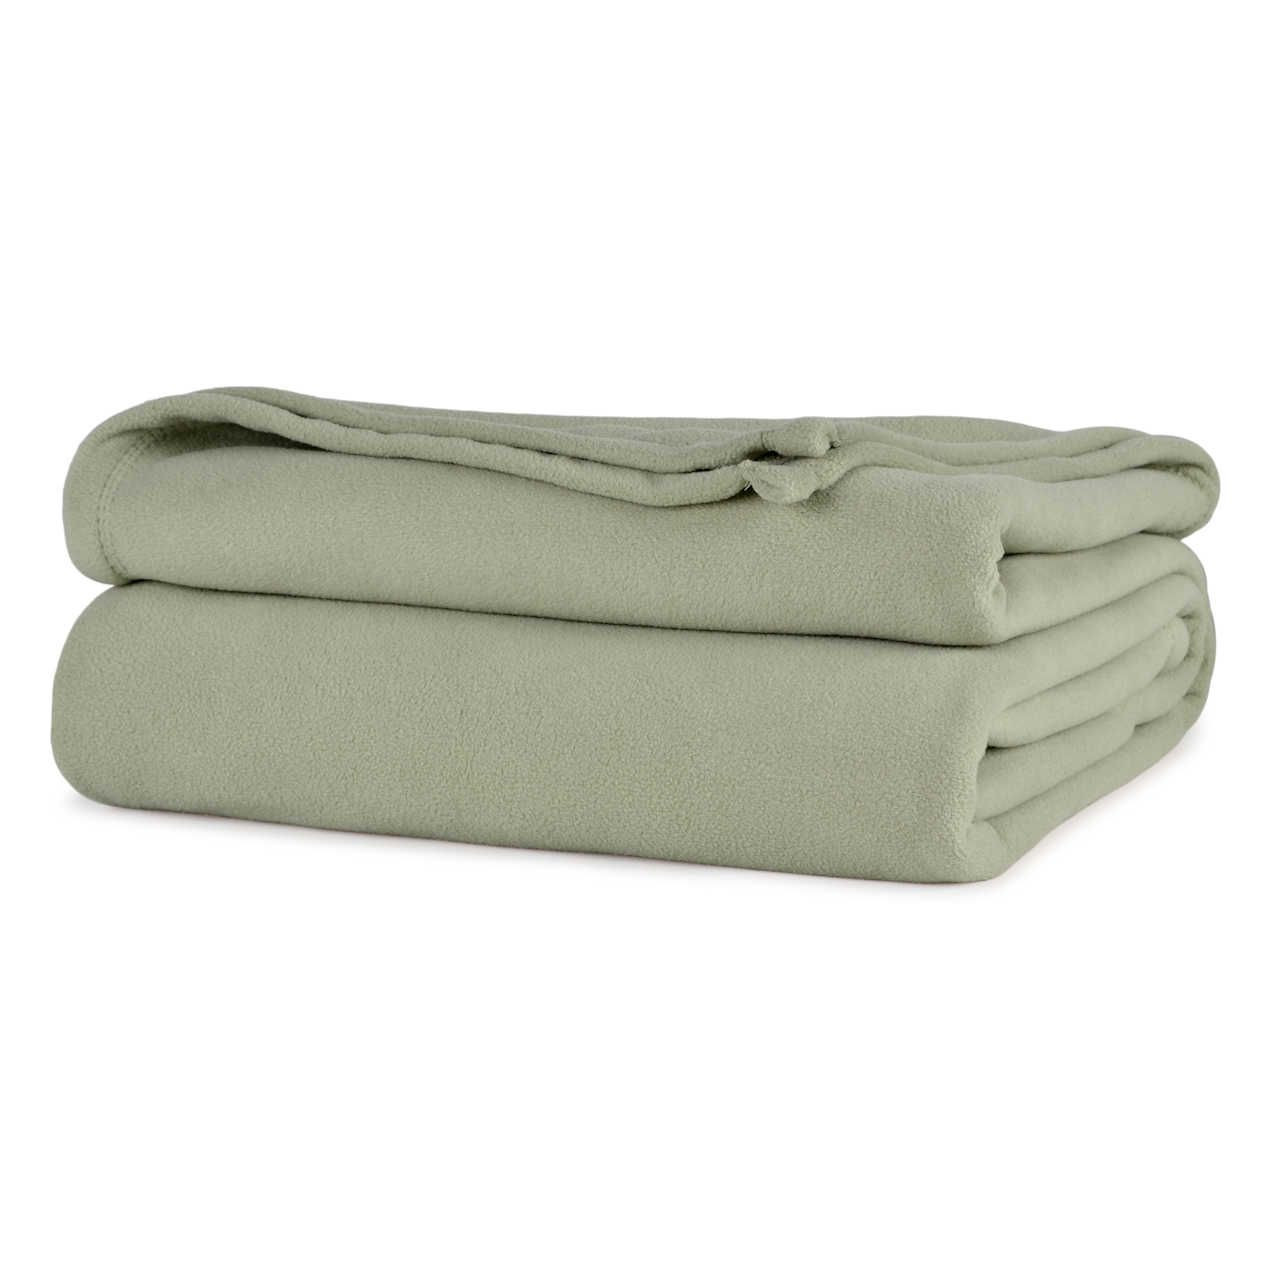 Berkshire Blanket Microfleece Twin Size Bed Blanket Dark Sage  Green,Lightweight Soft Breathable Plush Micro Fleece Blanket for Bed Couch  Sofa,60x92